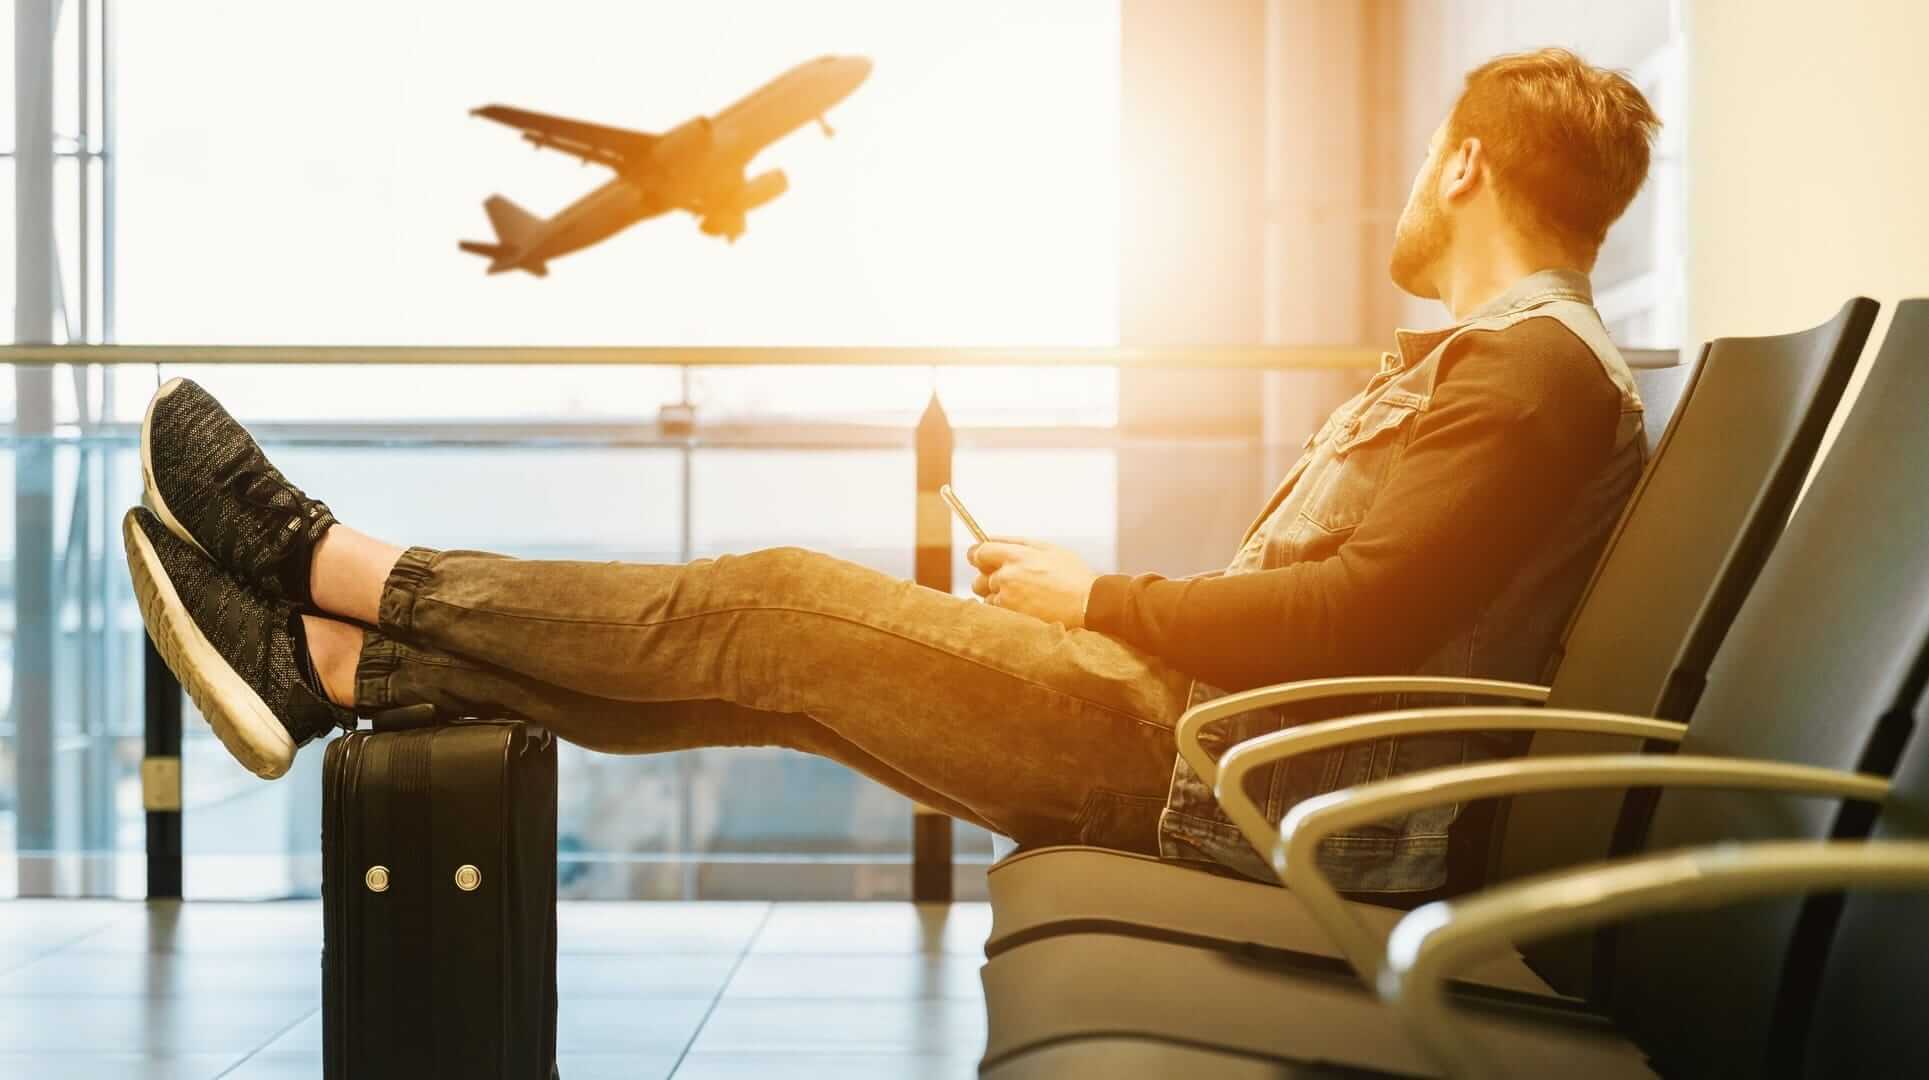 A man sitting at the airport looking at a plane in midair